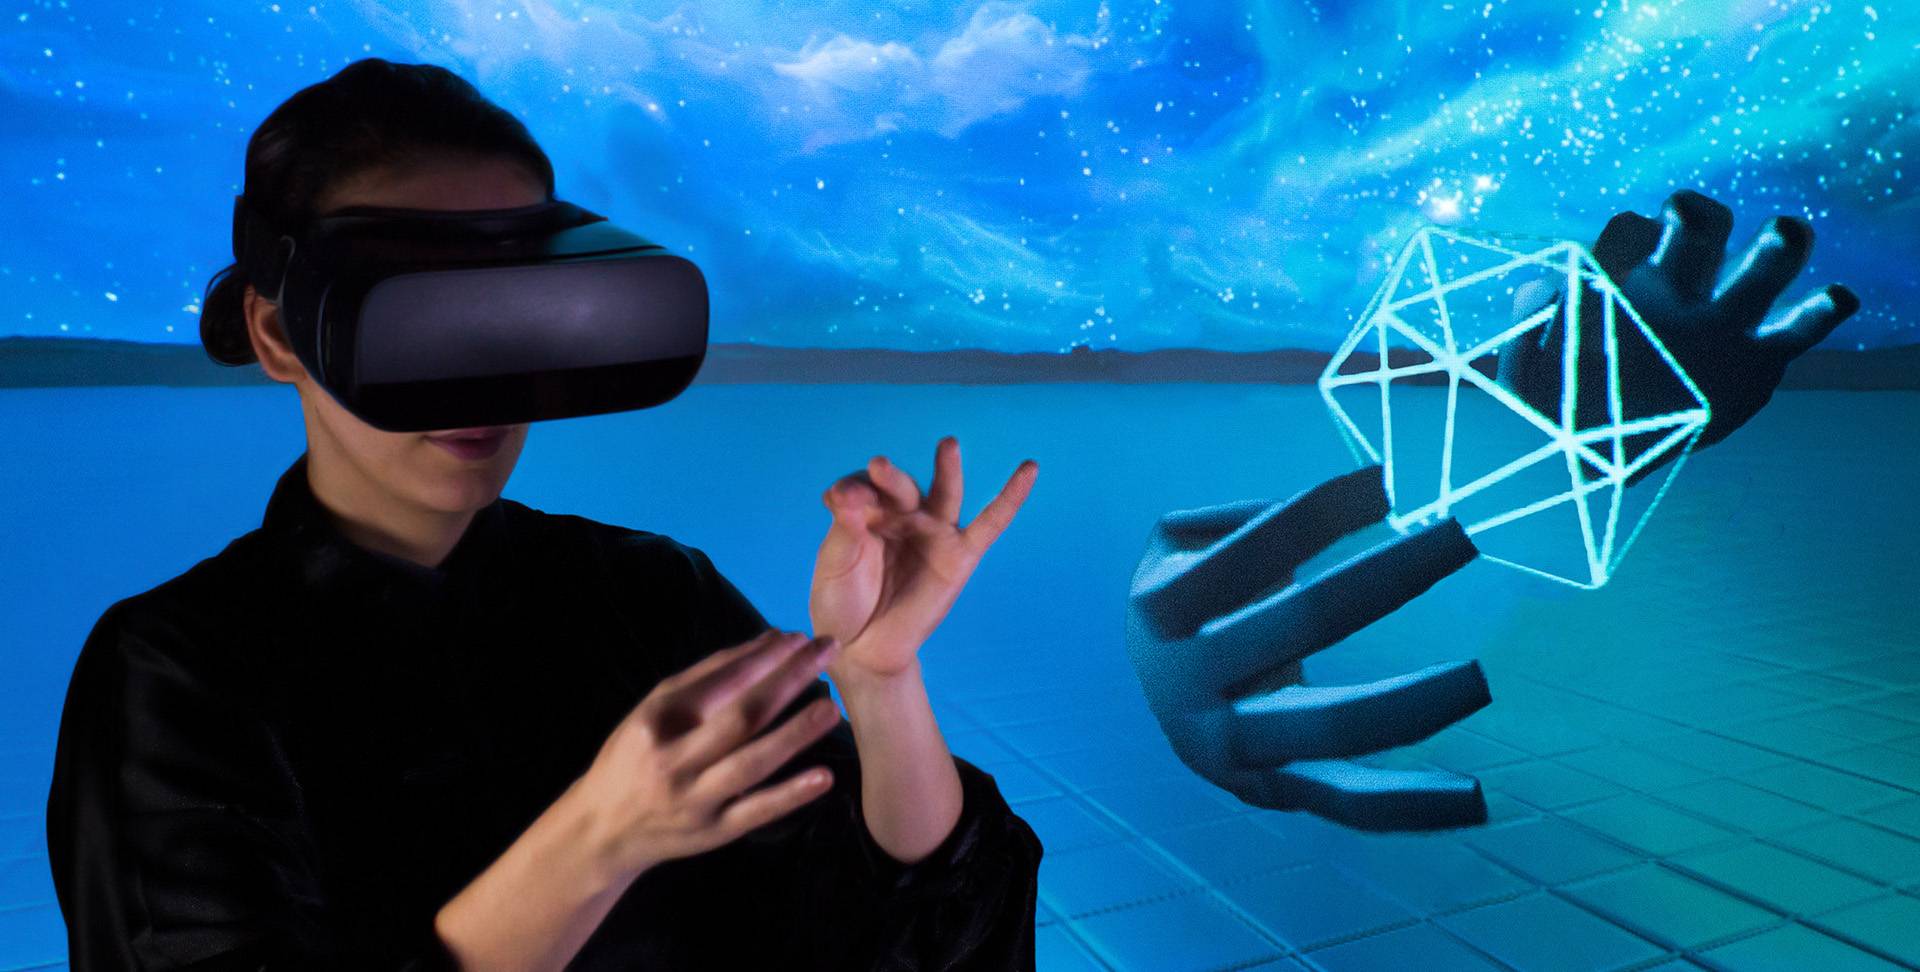 leap motion android sdk download